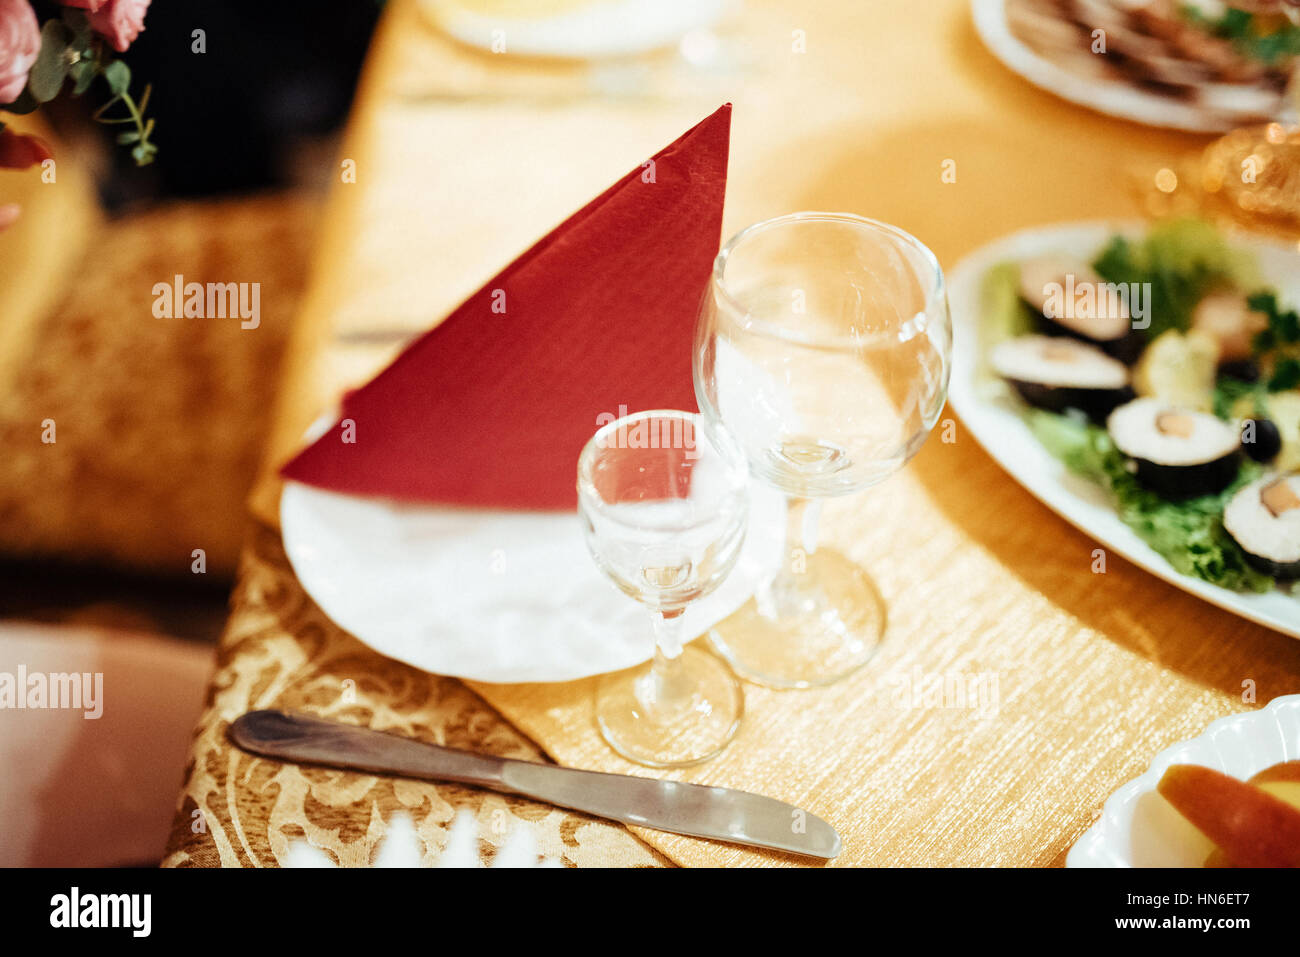 Formal stylish setting on a dinner table with elegant glassware Stock Photo